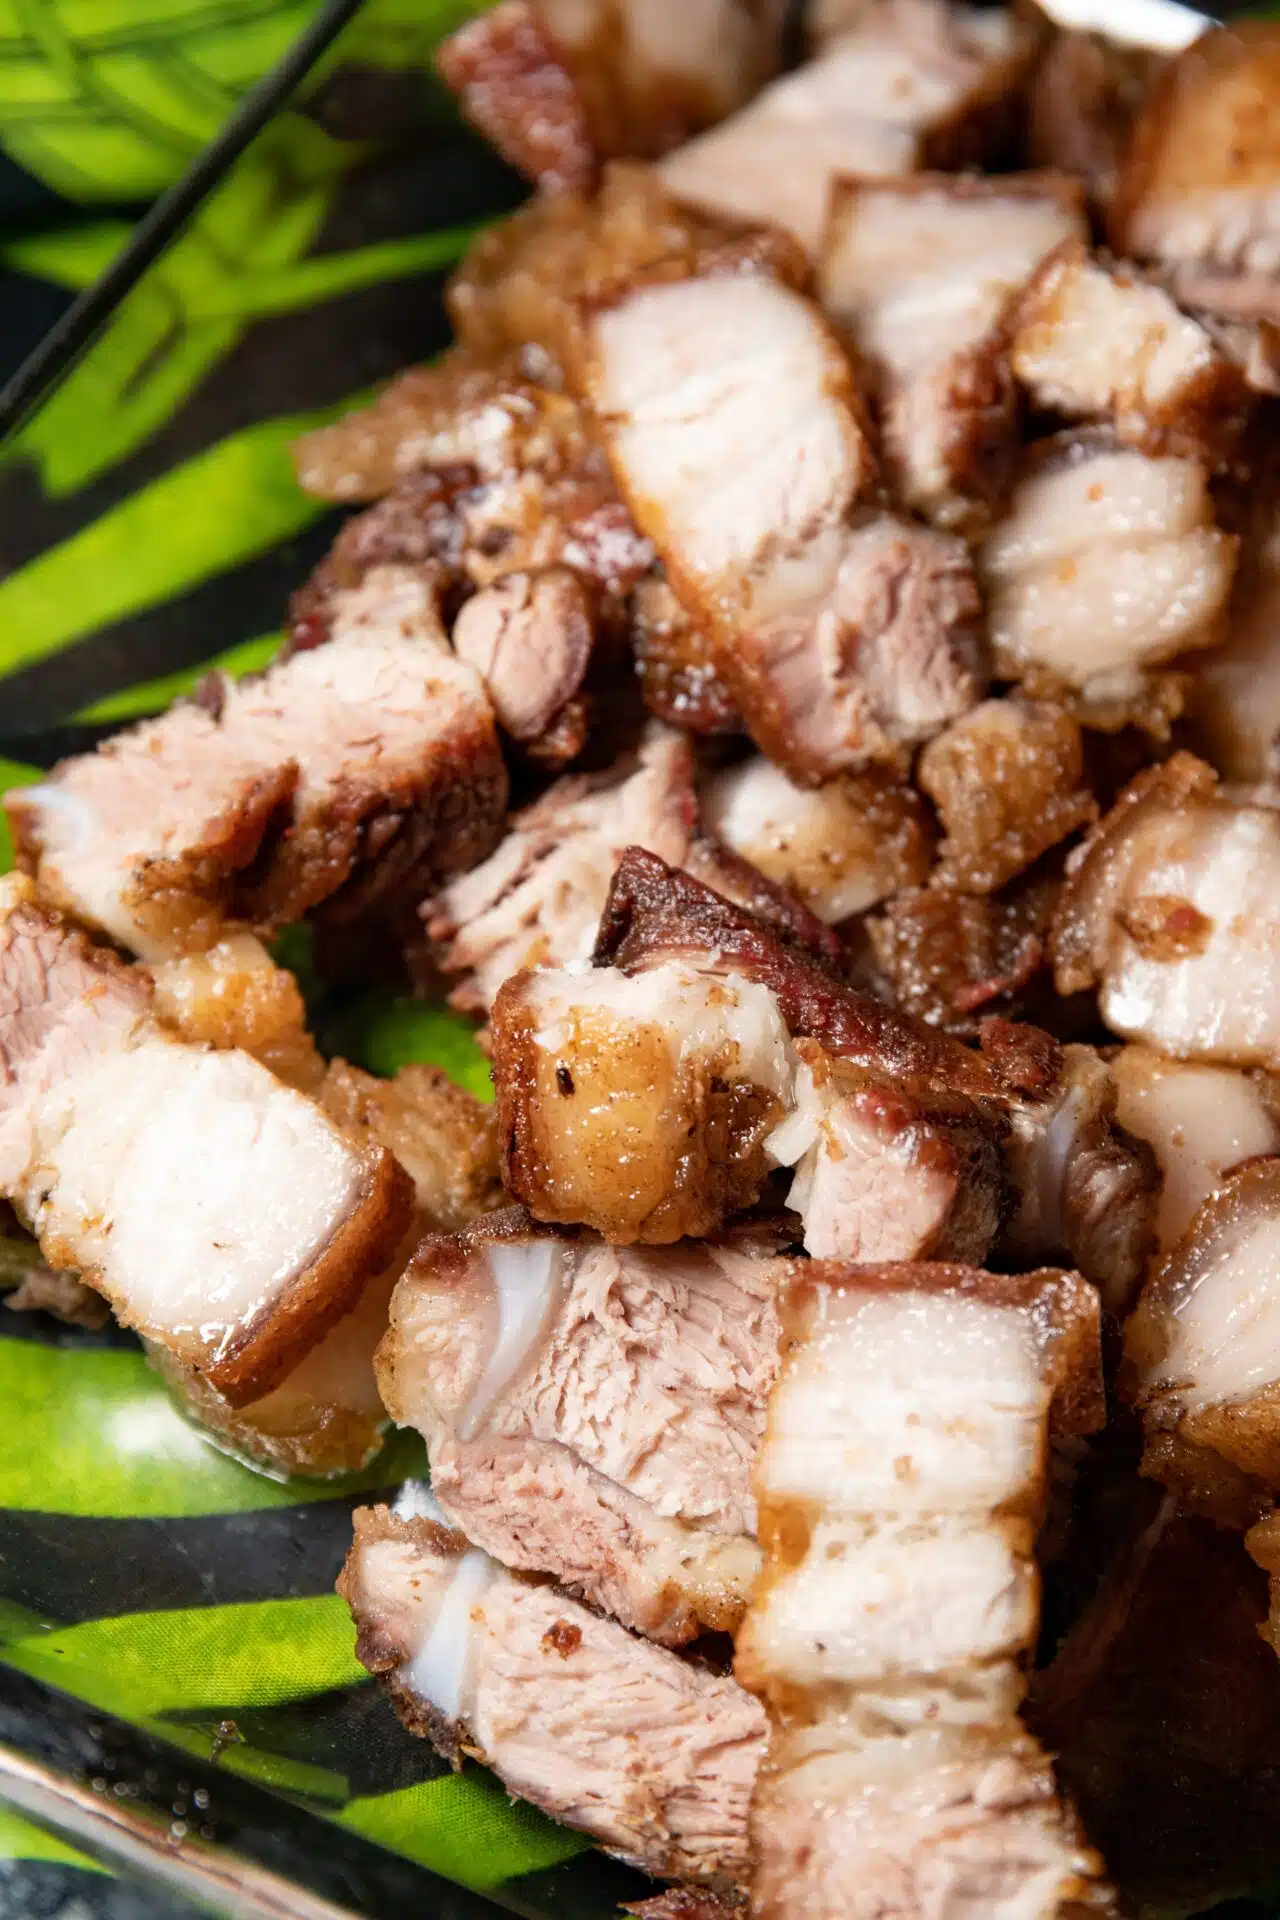 Pick Pork: Midweek meal For Tonight